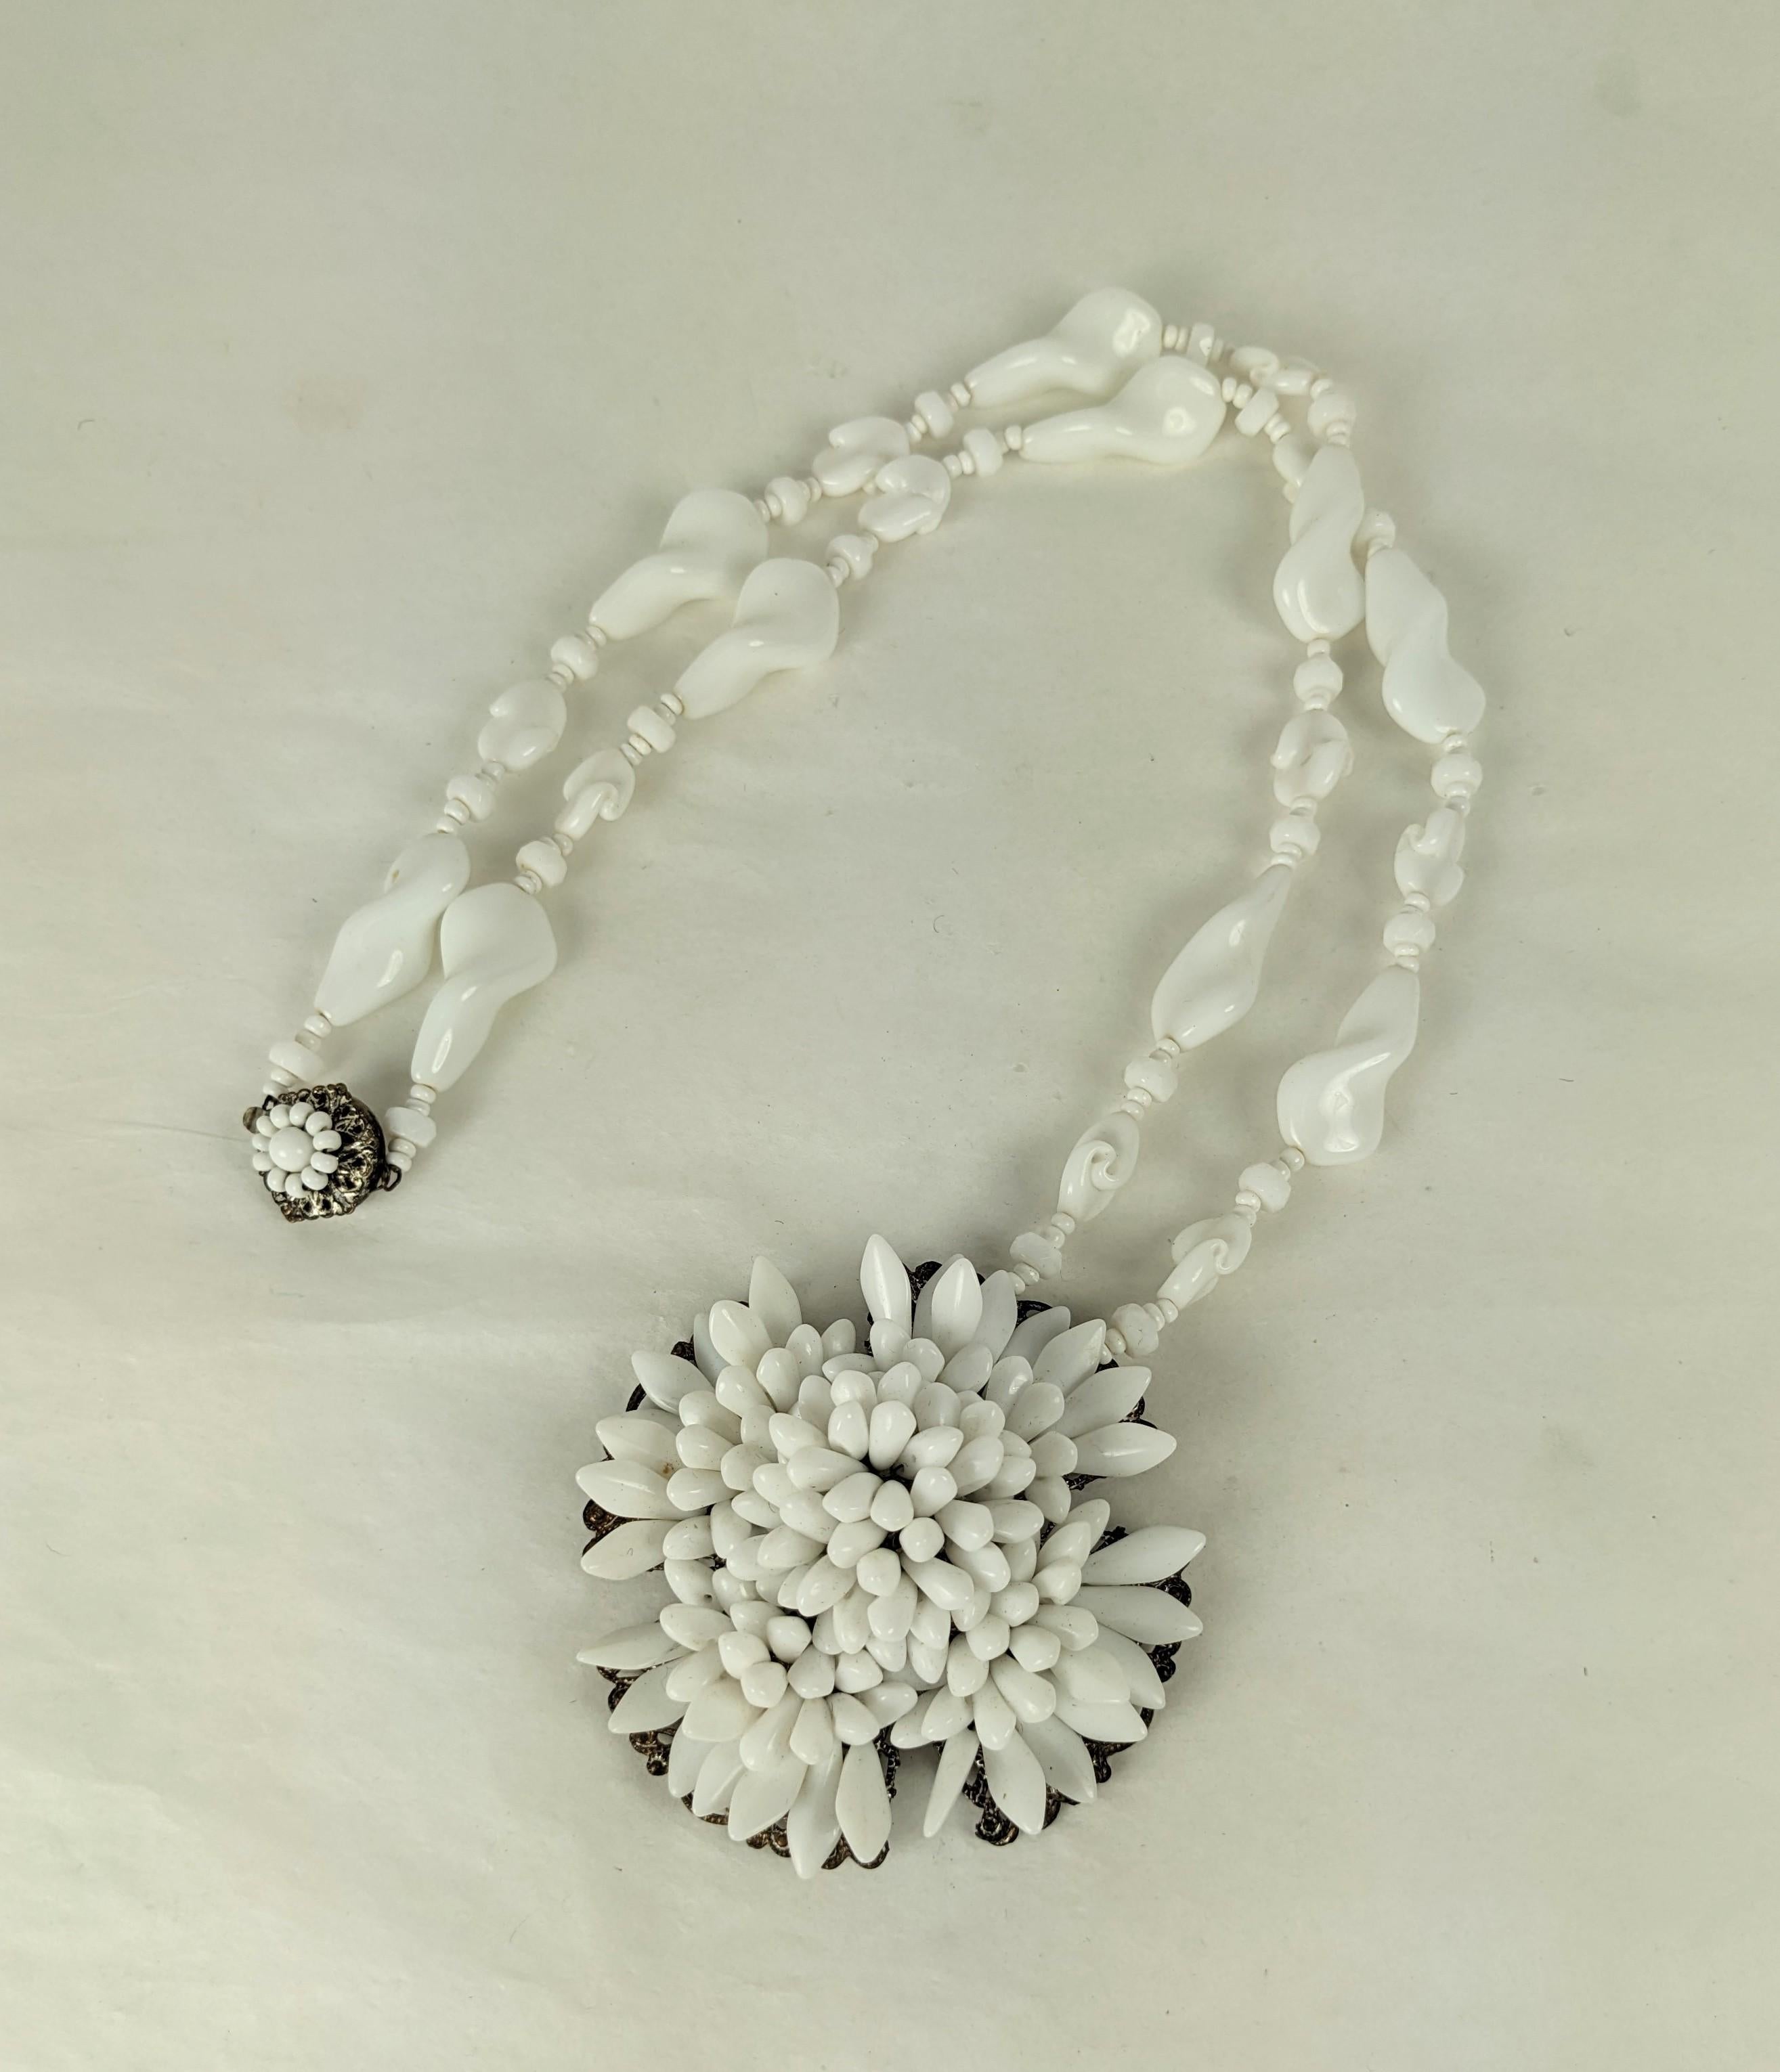 Miriam Haskell Milk Glass Pendant from the 1950's. A filigree base is hand sewn with dozens of milk glass spikes on a necklace of hand made large swirl and seed beads. Signed on clasp. 1950's USA. 
Necklace 24